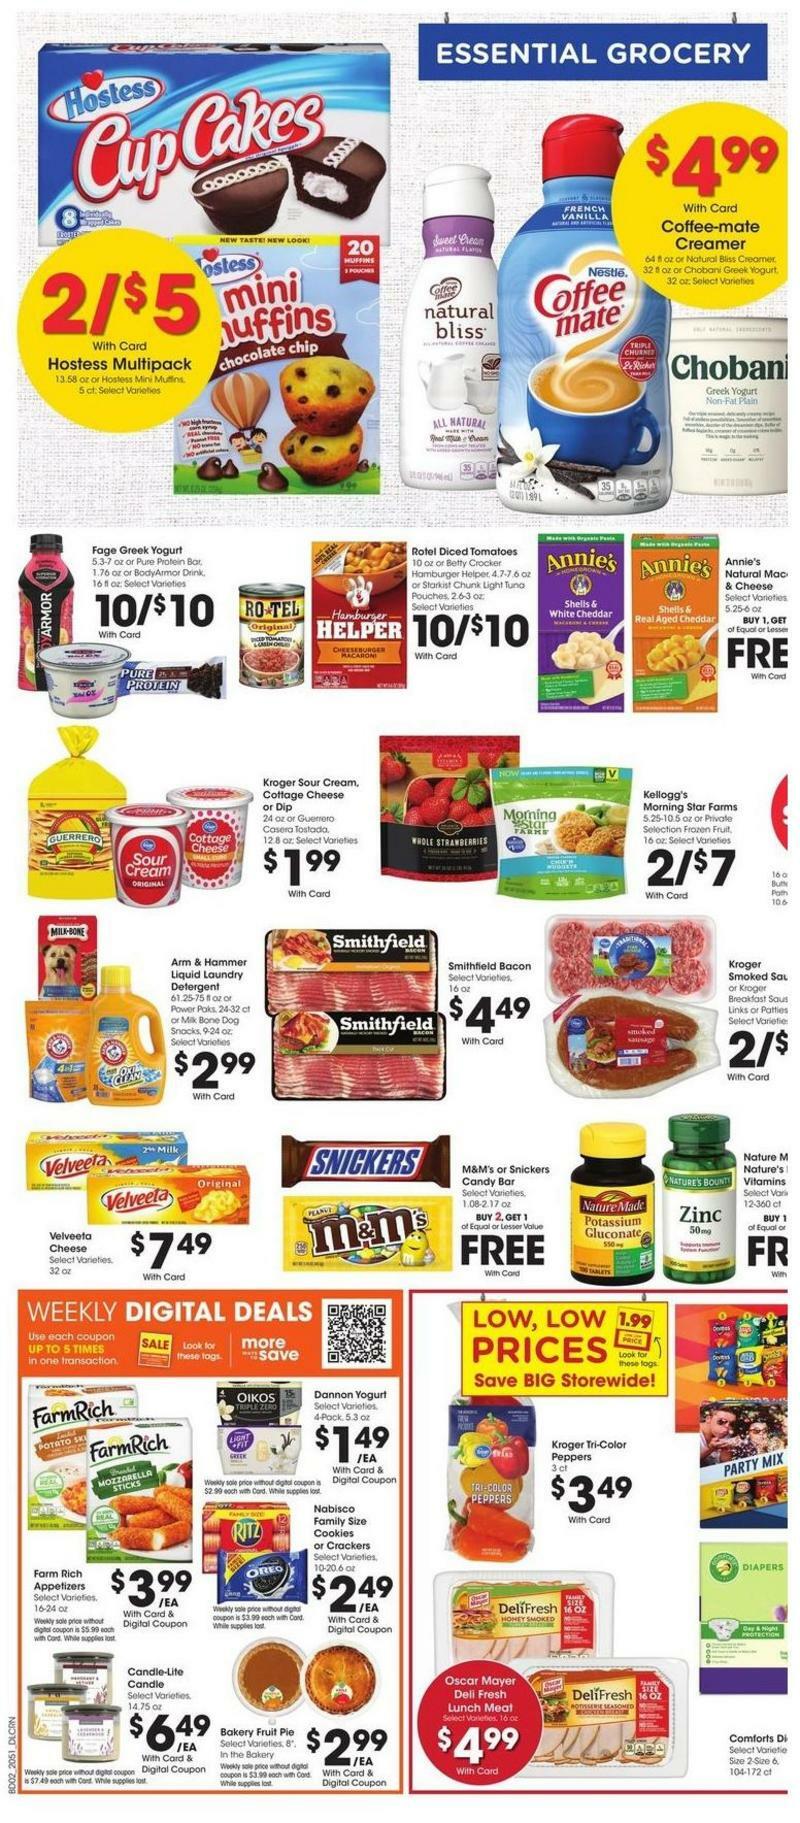 Kroger Weekly Ad from January 20